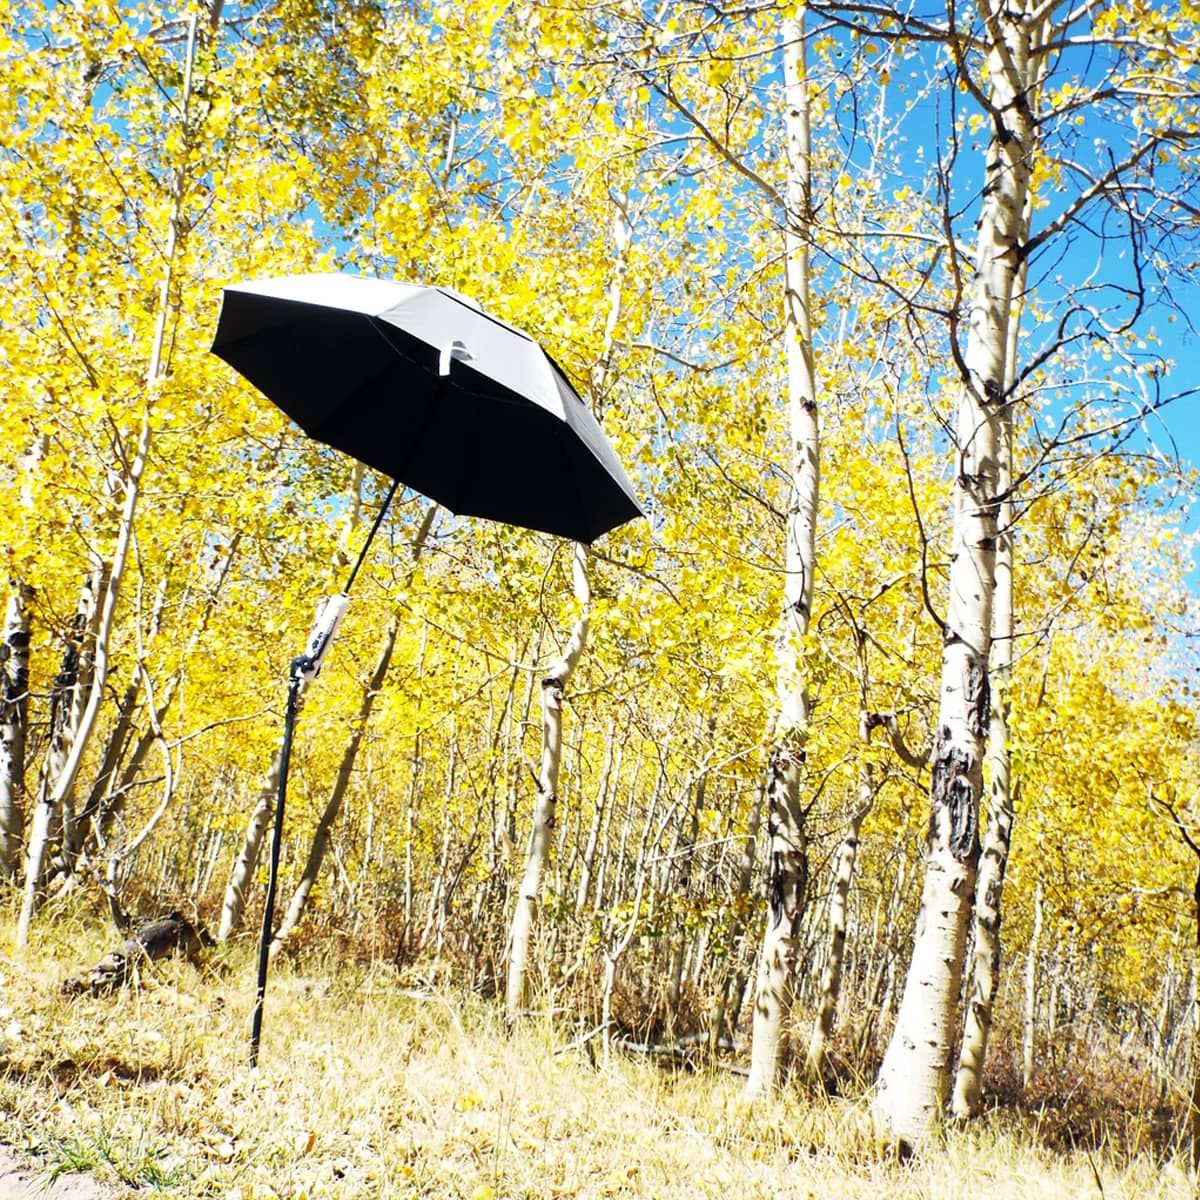 Provides shade for you and your easel without putting your easel at risk of a wind gust